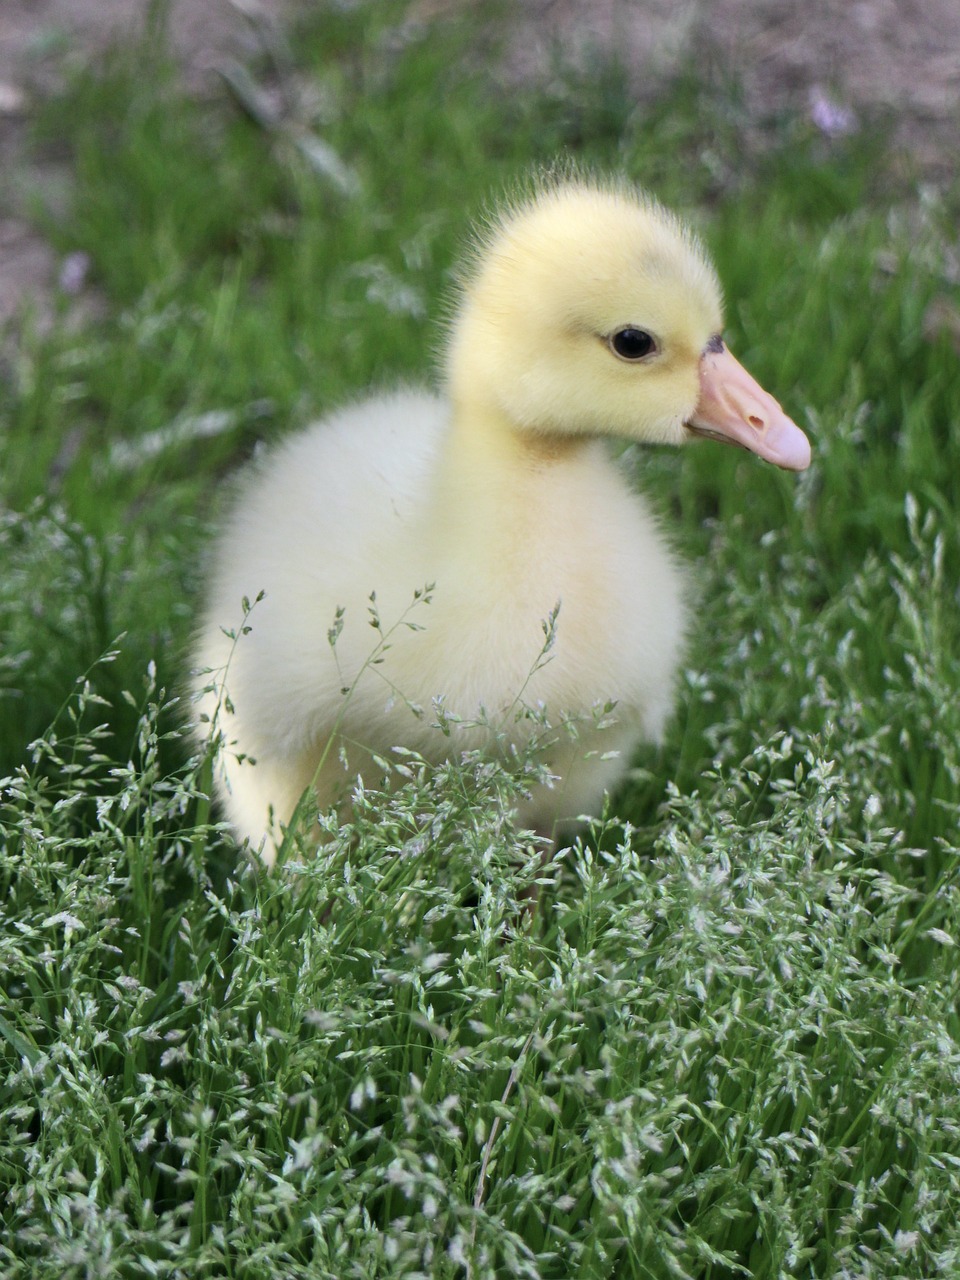 a duck that is standing in the grass, a picture, pixabay, soft pale golden skin, little kid, with soft bushes, daisy